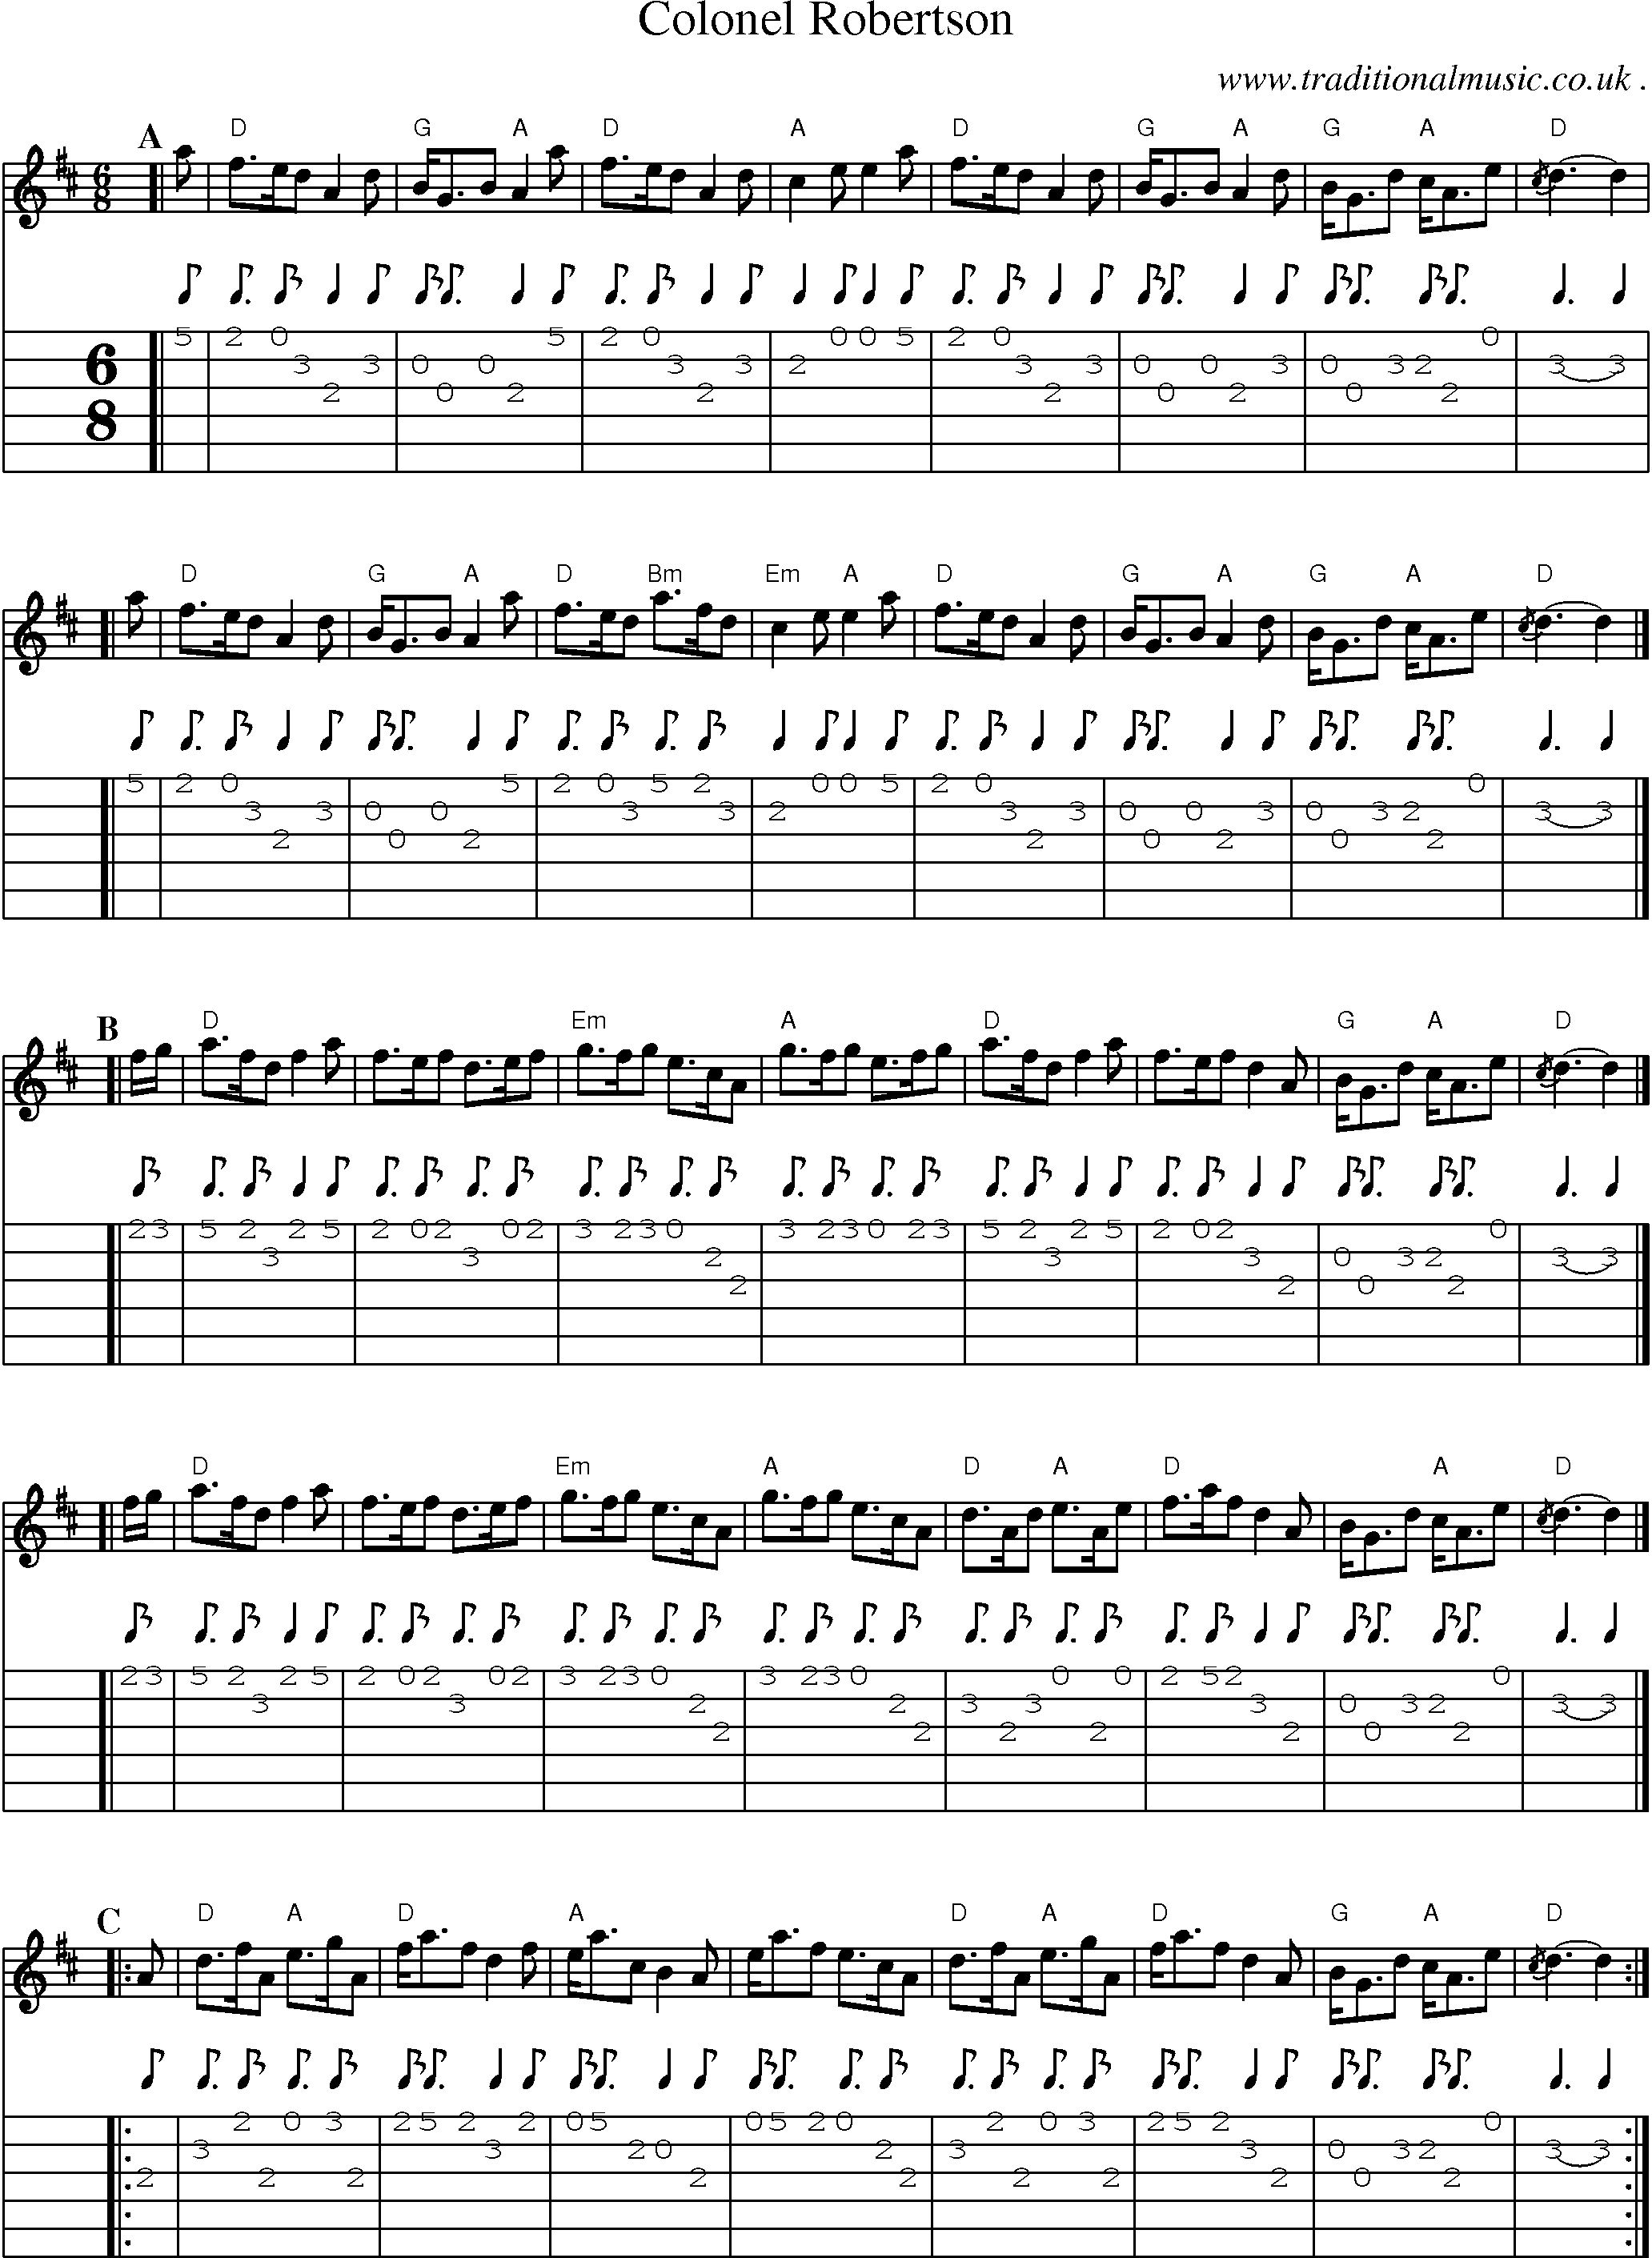 Sheet-music  score, Chords and Guitar Tabs for Colonel Robertson